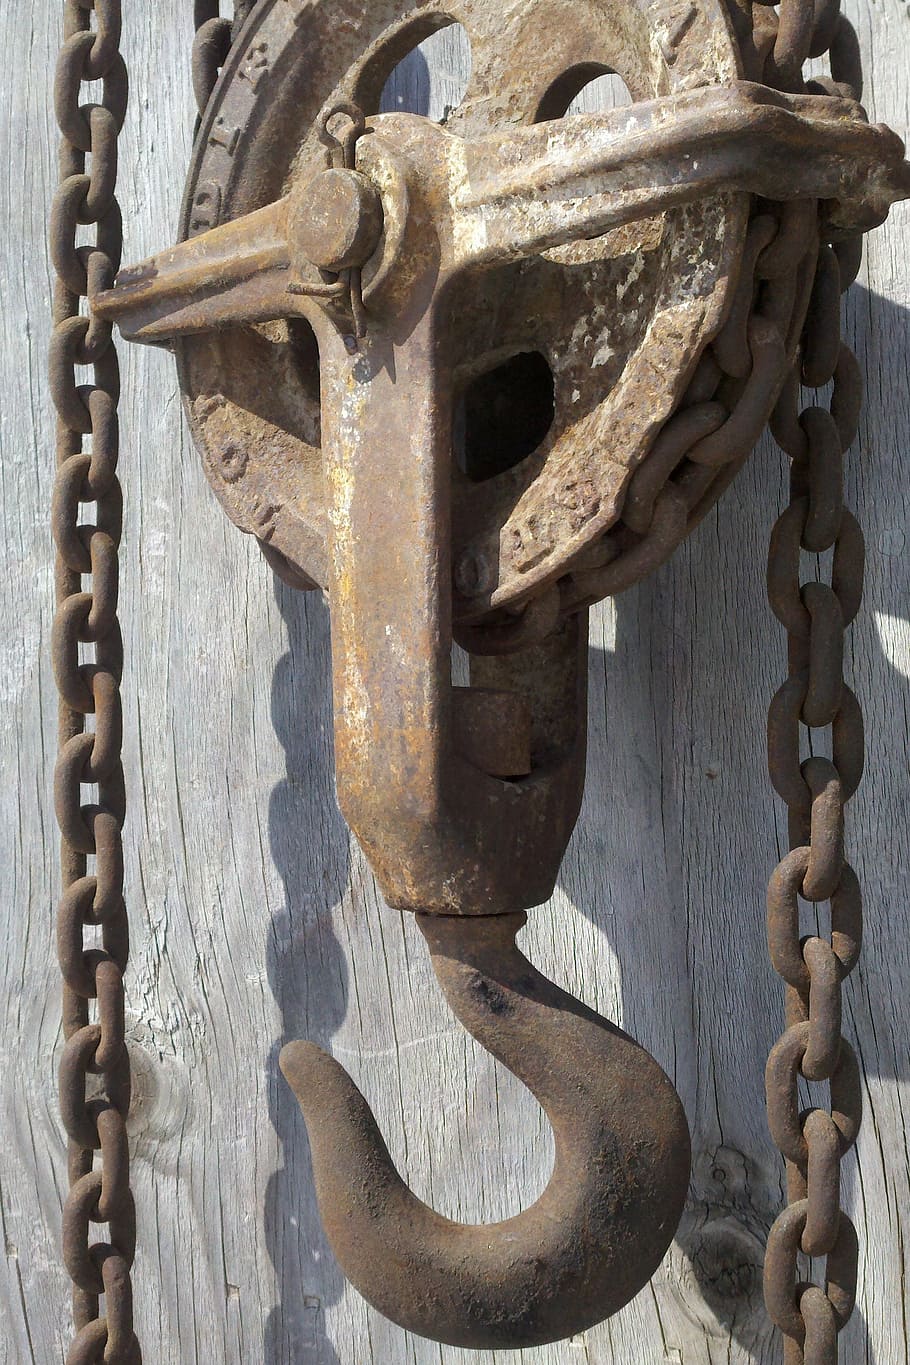 chain hoist, chain, pulley, hook, wood, rust, antique, metal, close-up, day